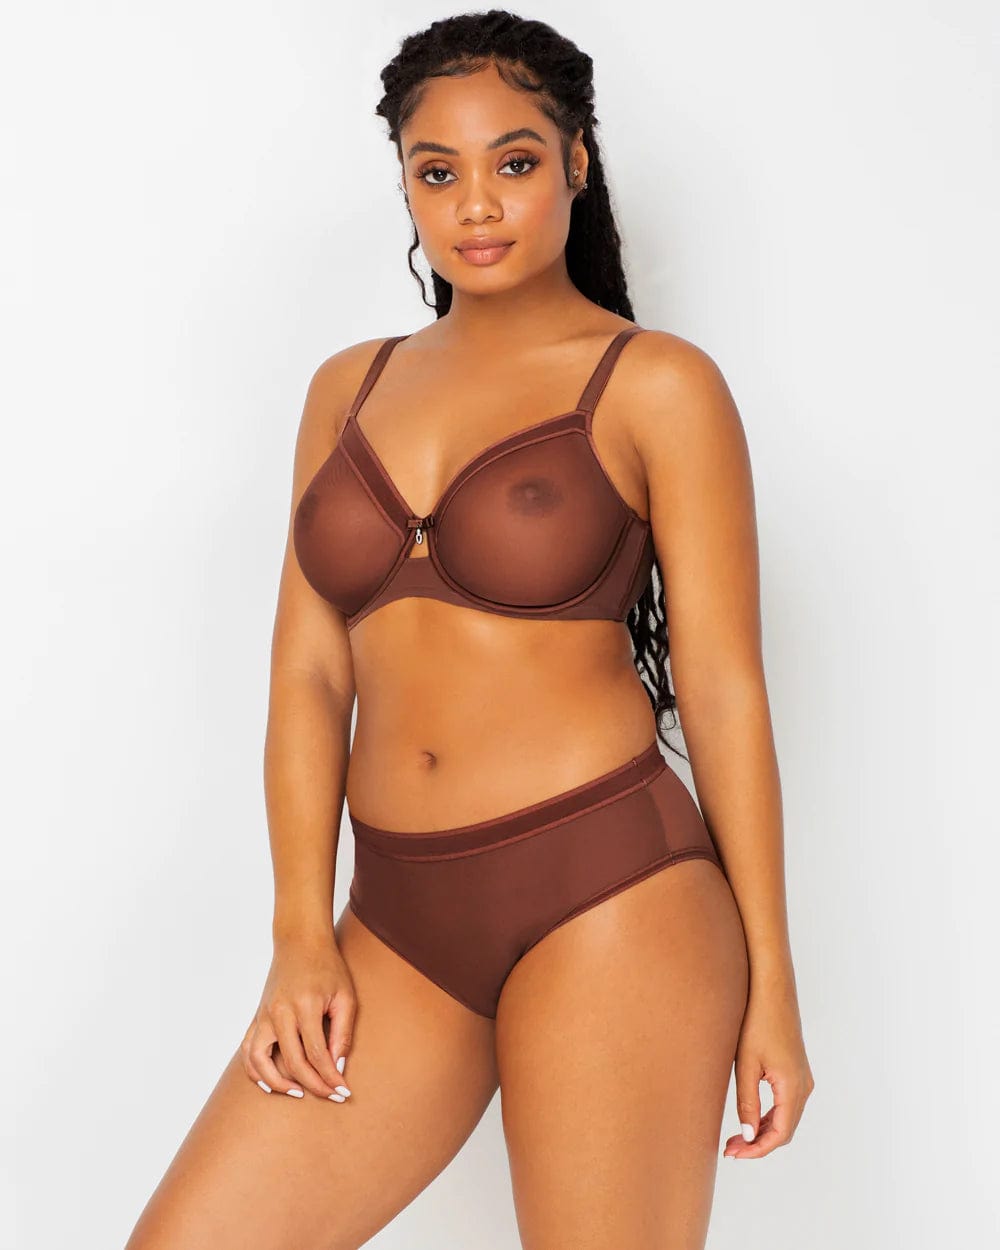 Buy Sheer See Through Bras and Panties Set Unlined Mesh Sexy Lace